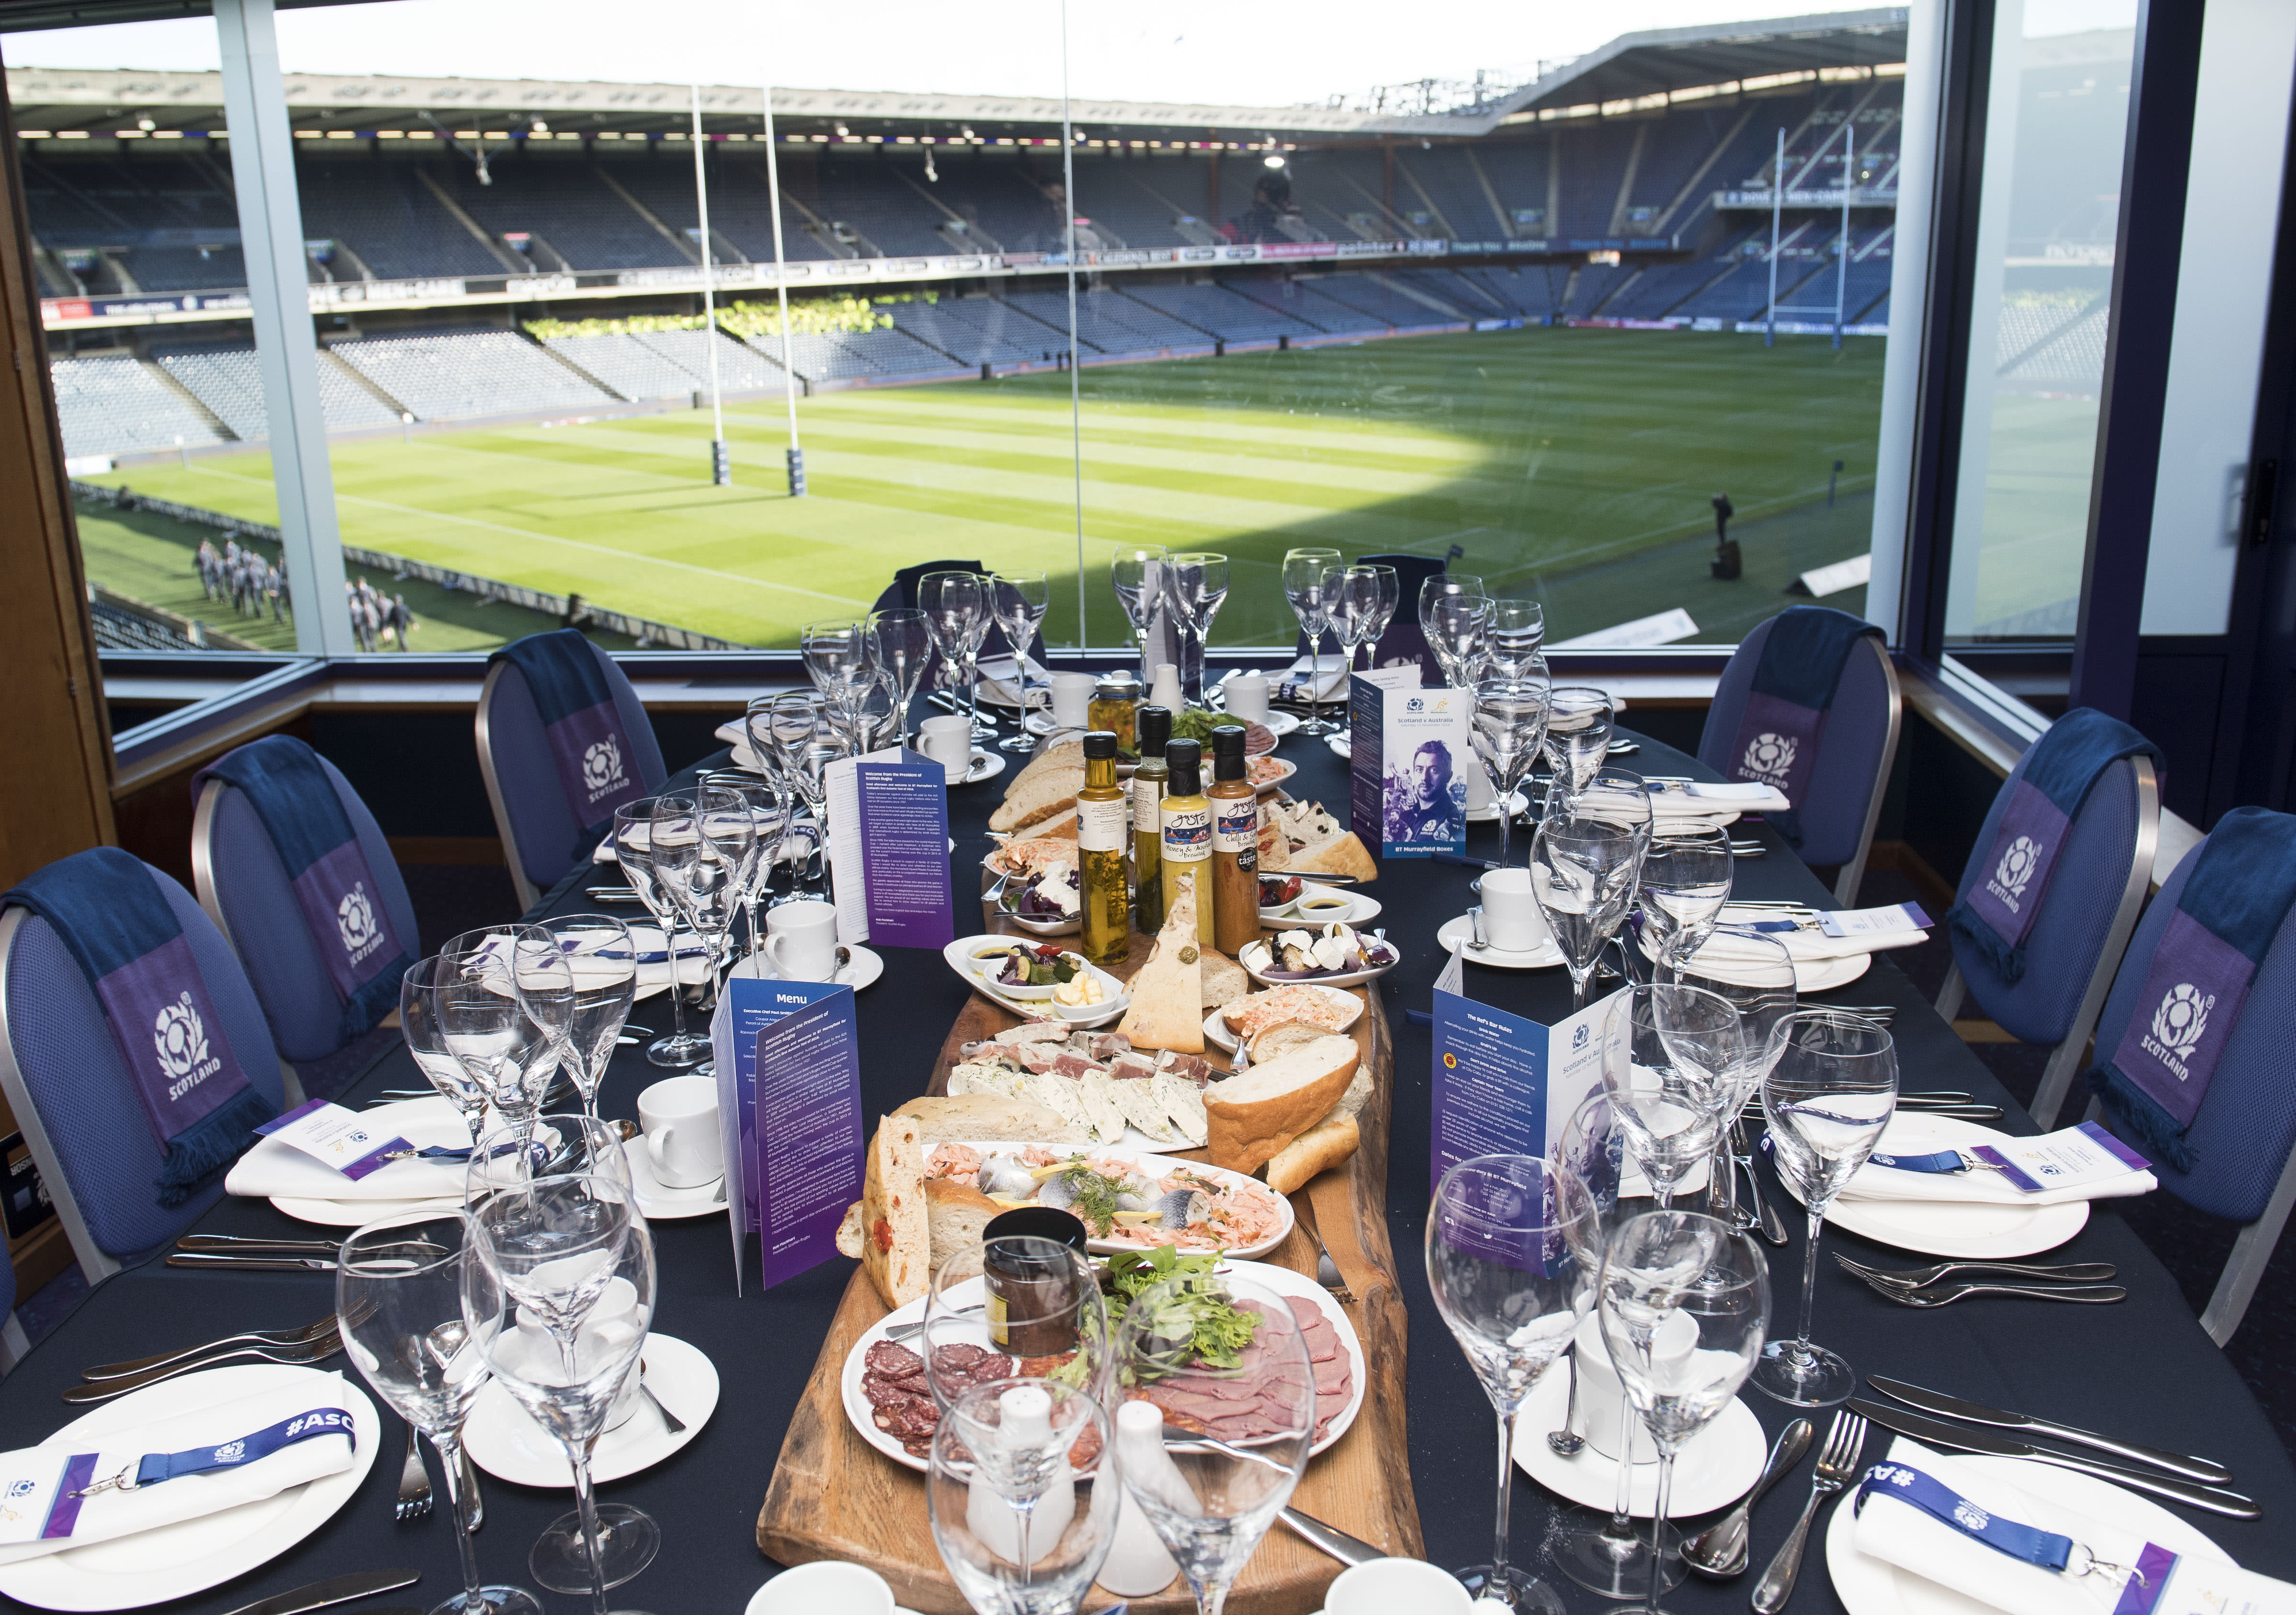 Executive box hospitality table, food spread and pitch views at BT Murrayfield